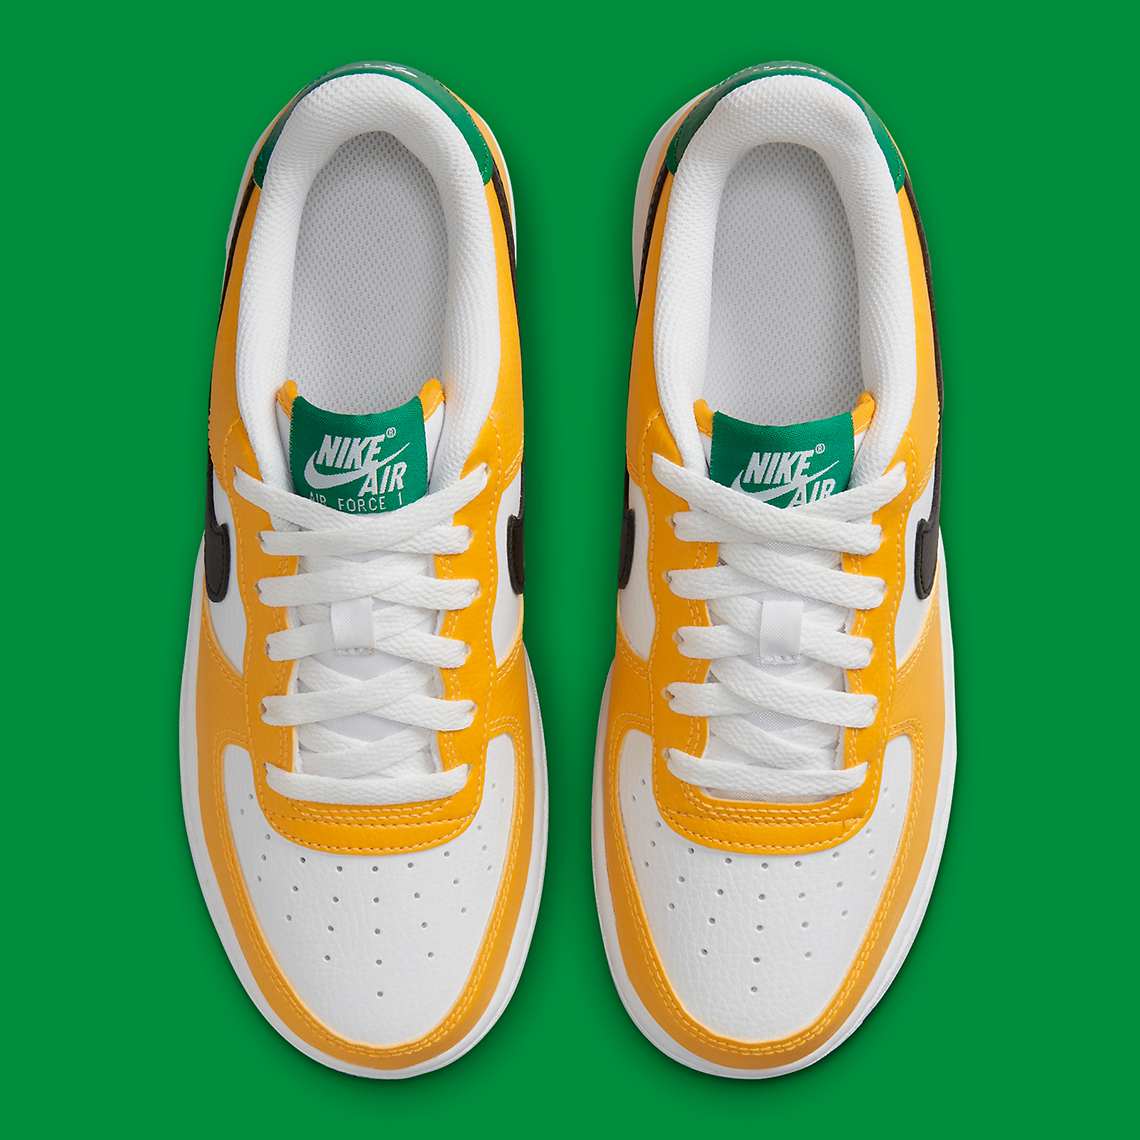 Nike Air Force 1 Low Oakland Athletics Fn8008 700 1